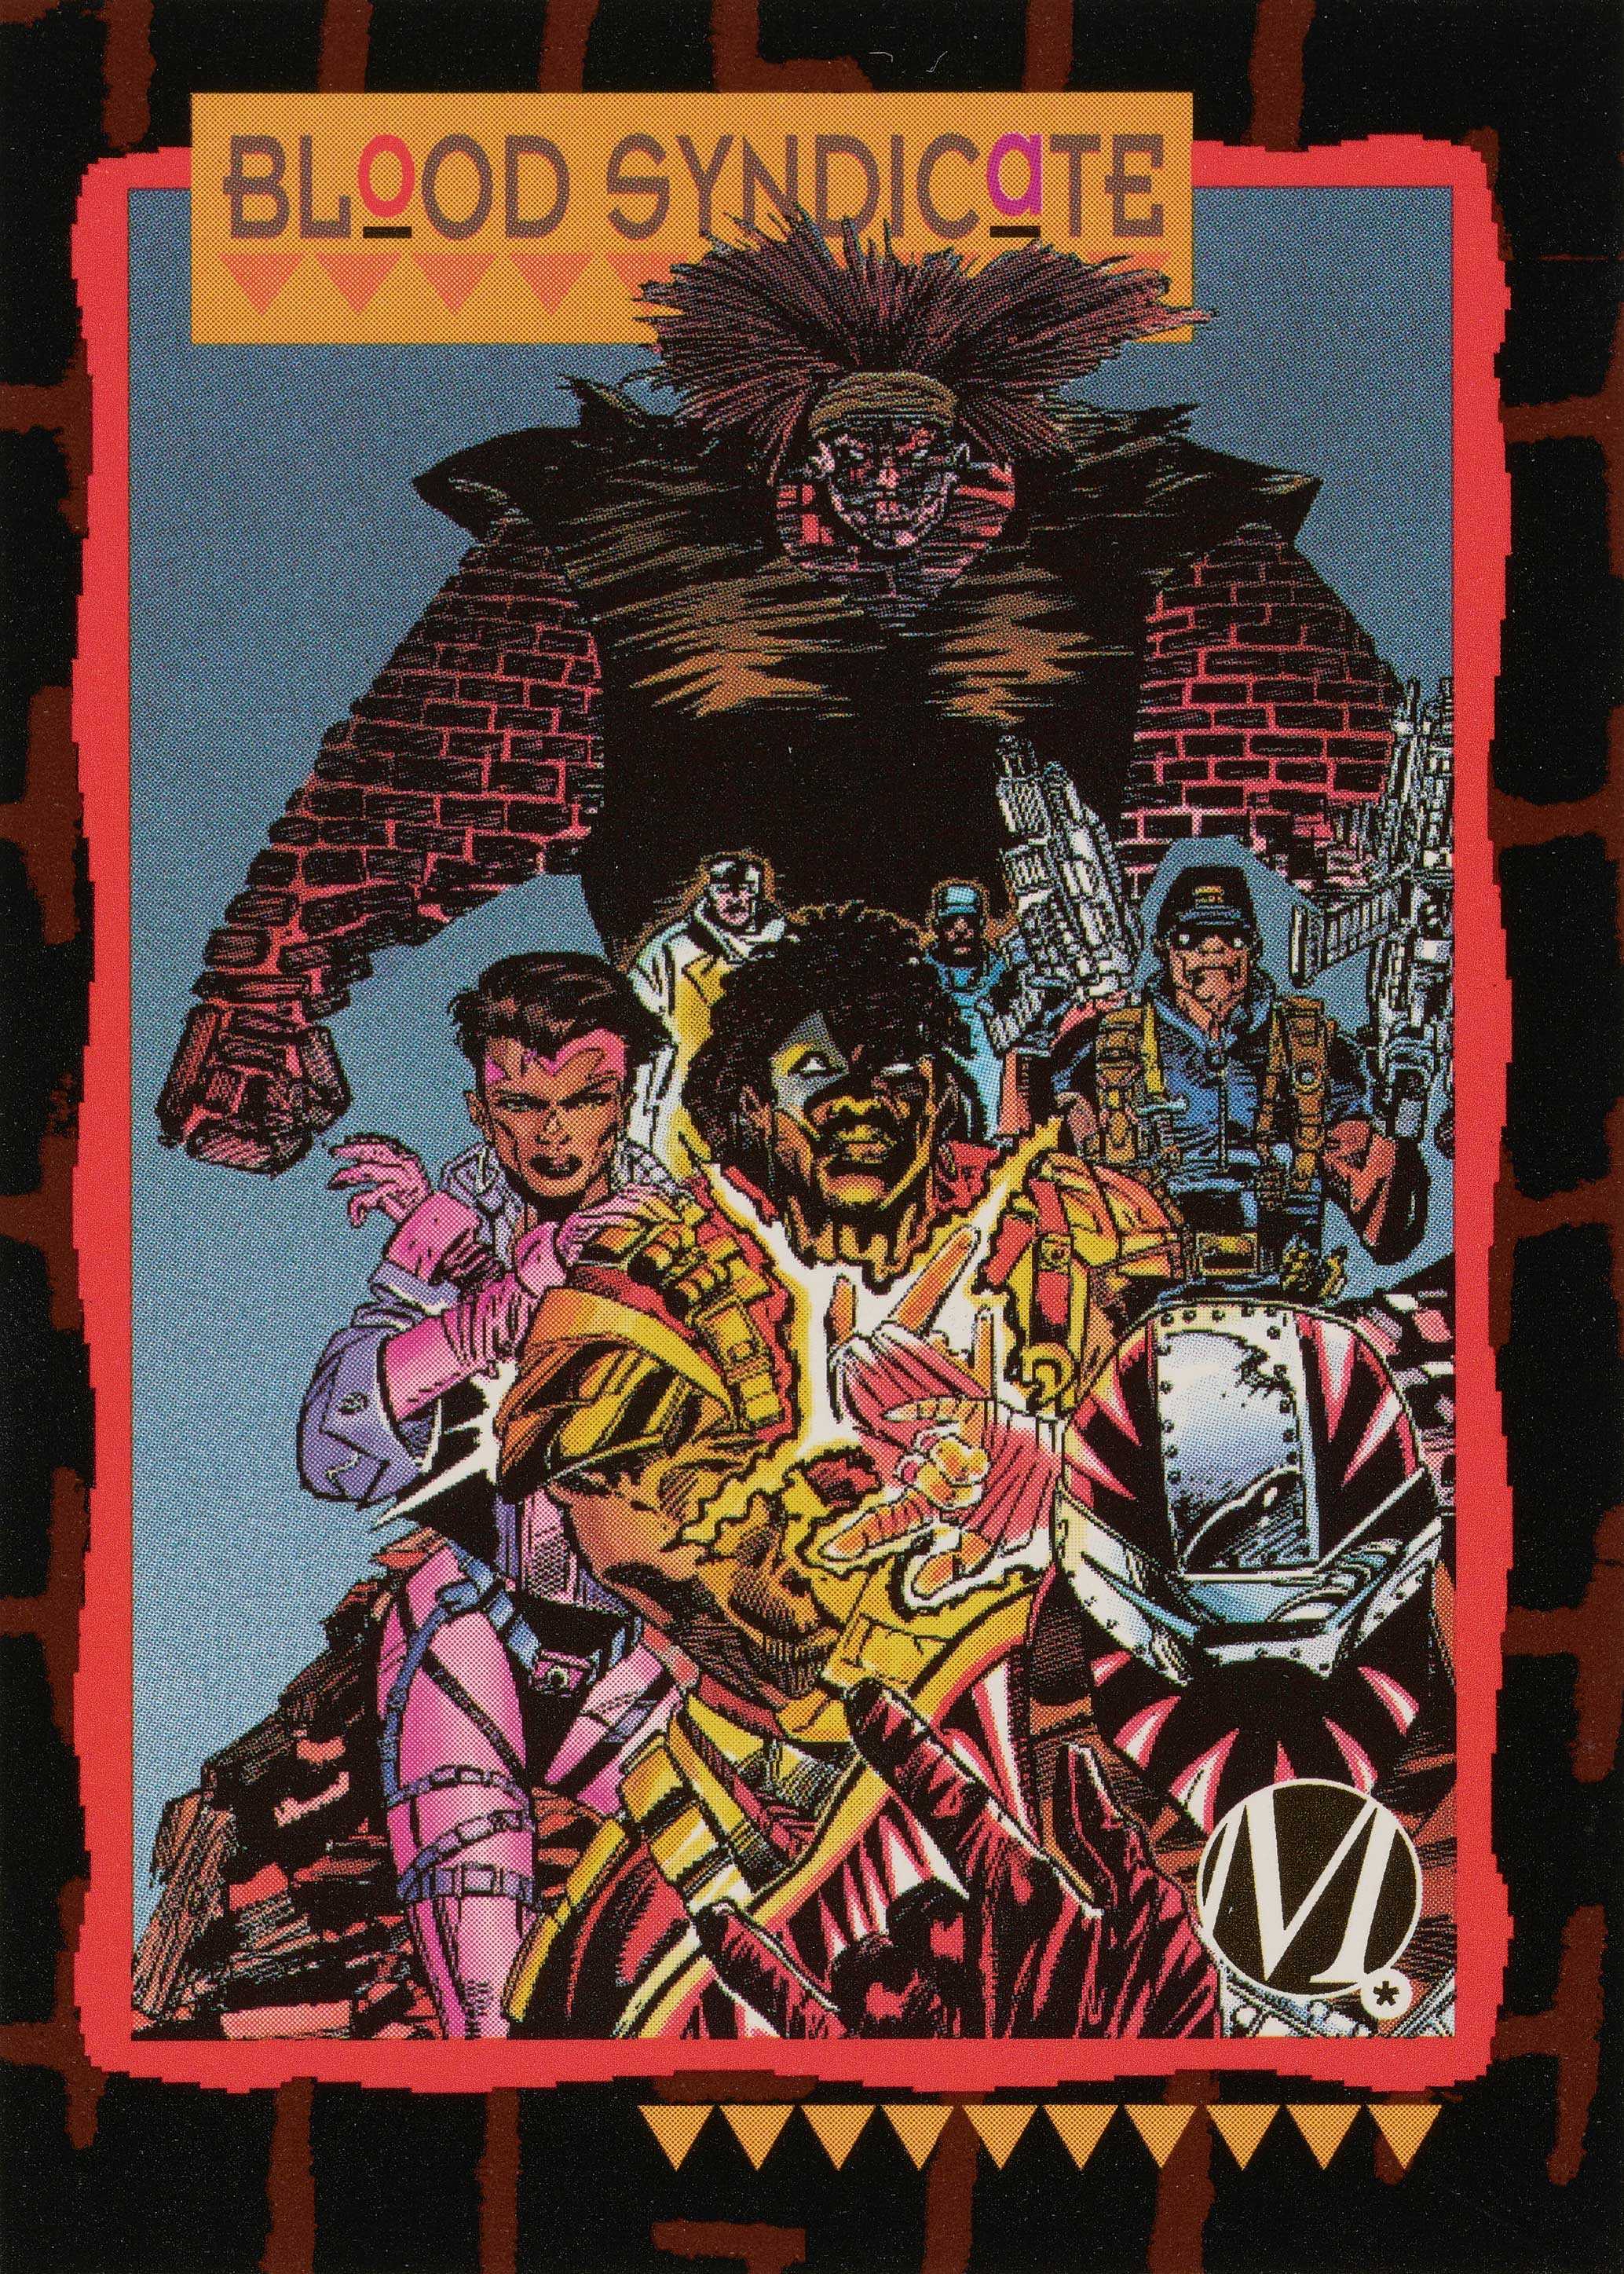 A Milestone trading card features a color image of the character Blood Syndicate.